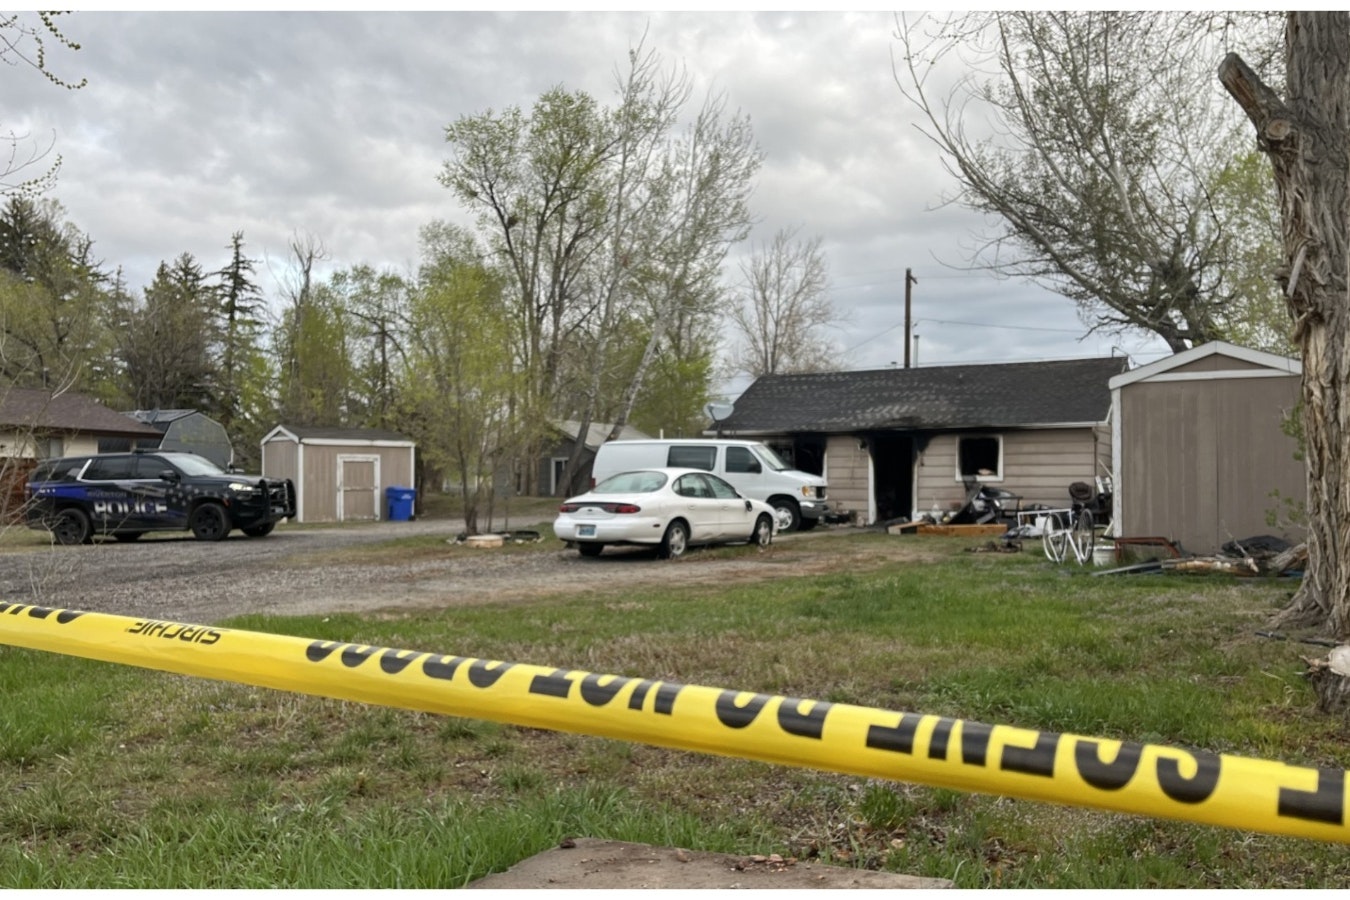 Rain misted on the charred Riverton home early Friday, five hours after emergency personnel found a deceased person inside it.